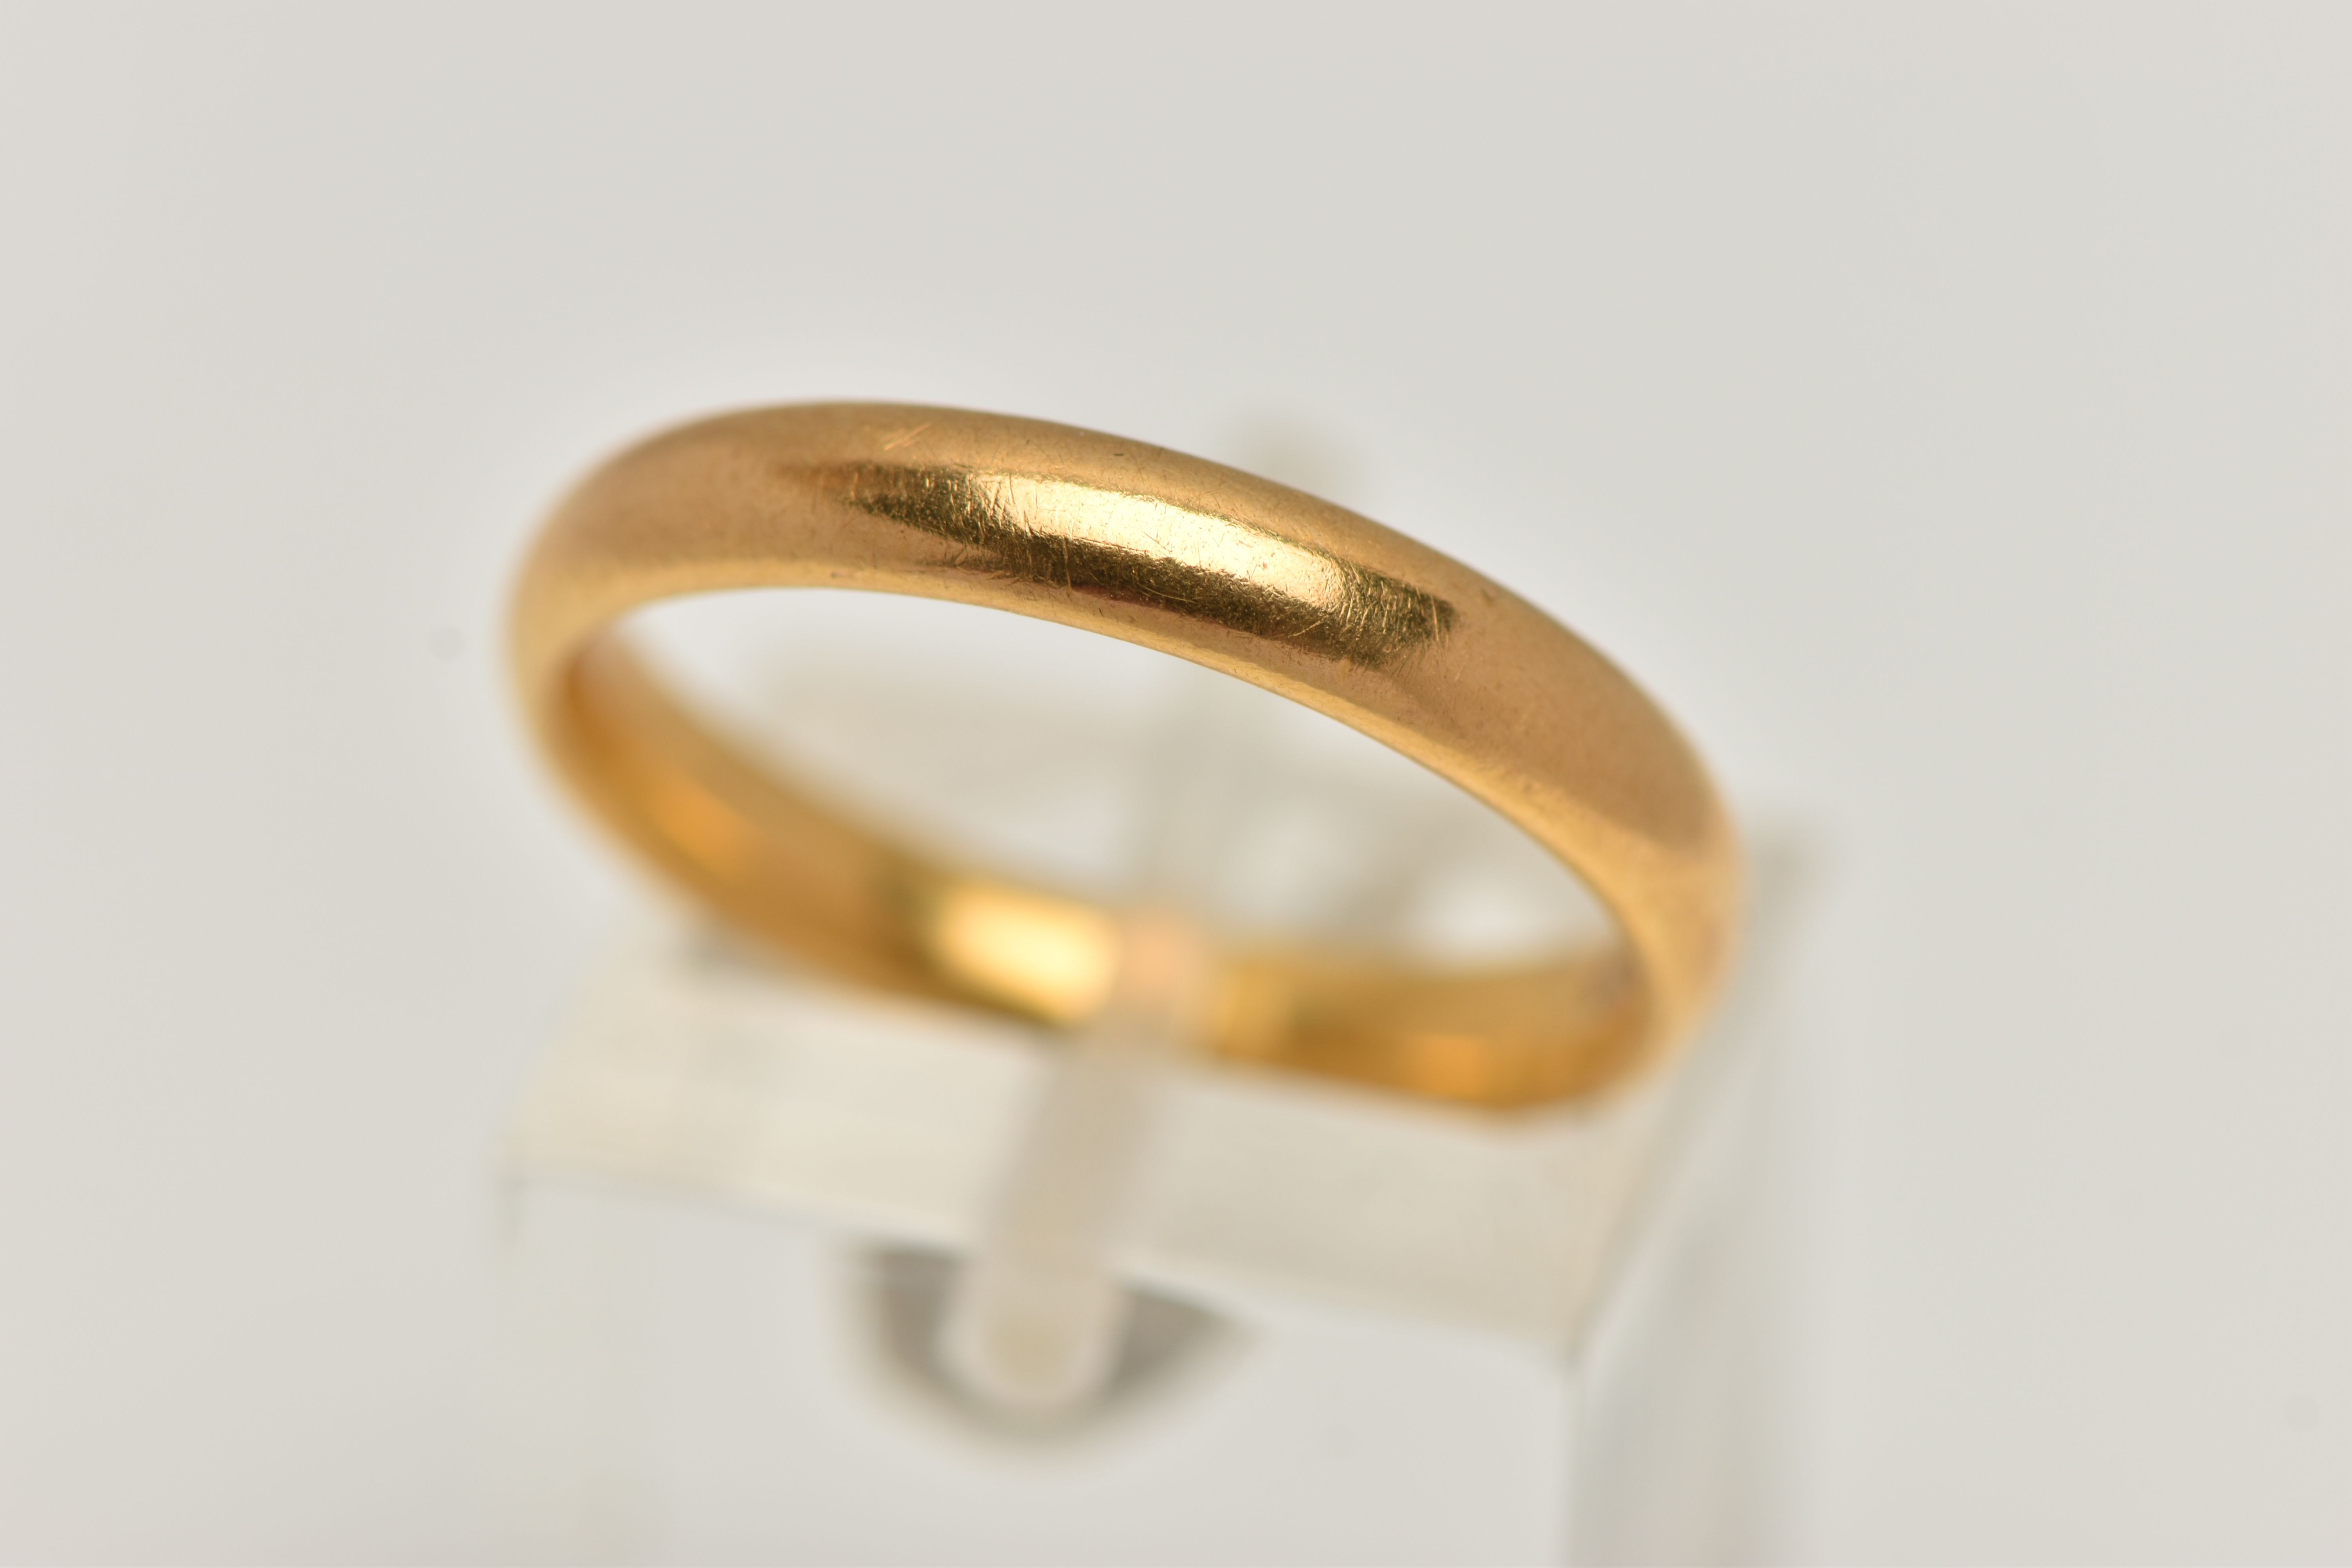 A 22CT GOLD BAND RING, polished band, approximate band width 3.3mm, hallmarked 22ct Birmingham, ring